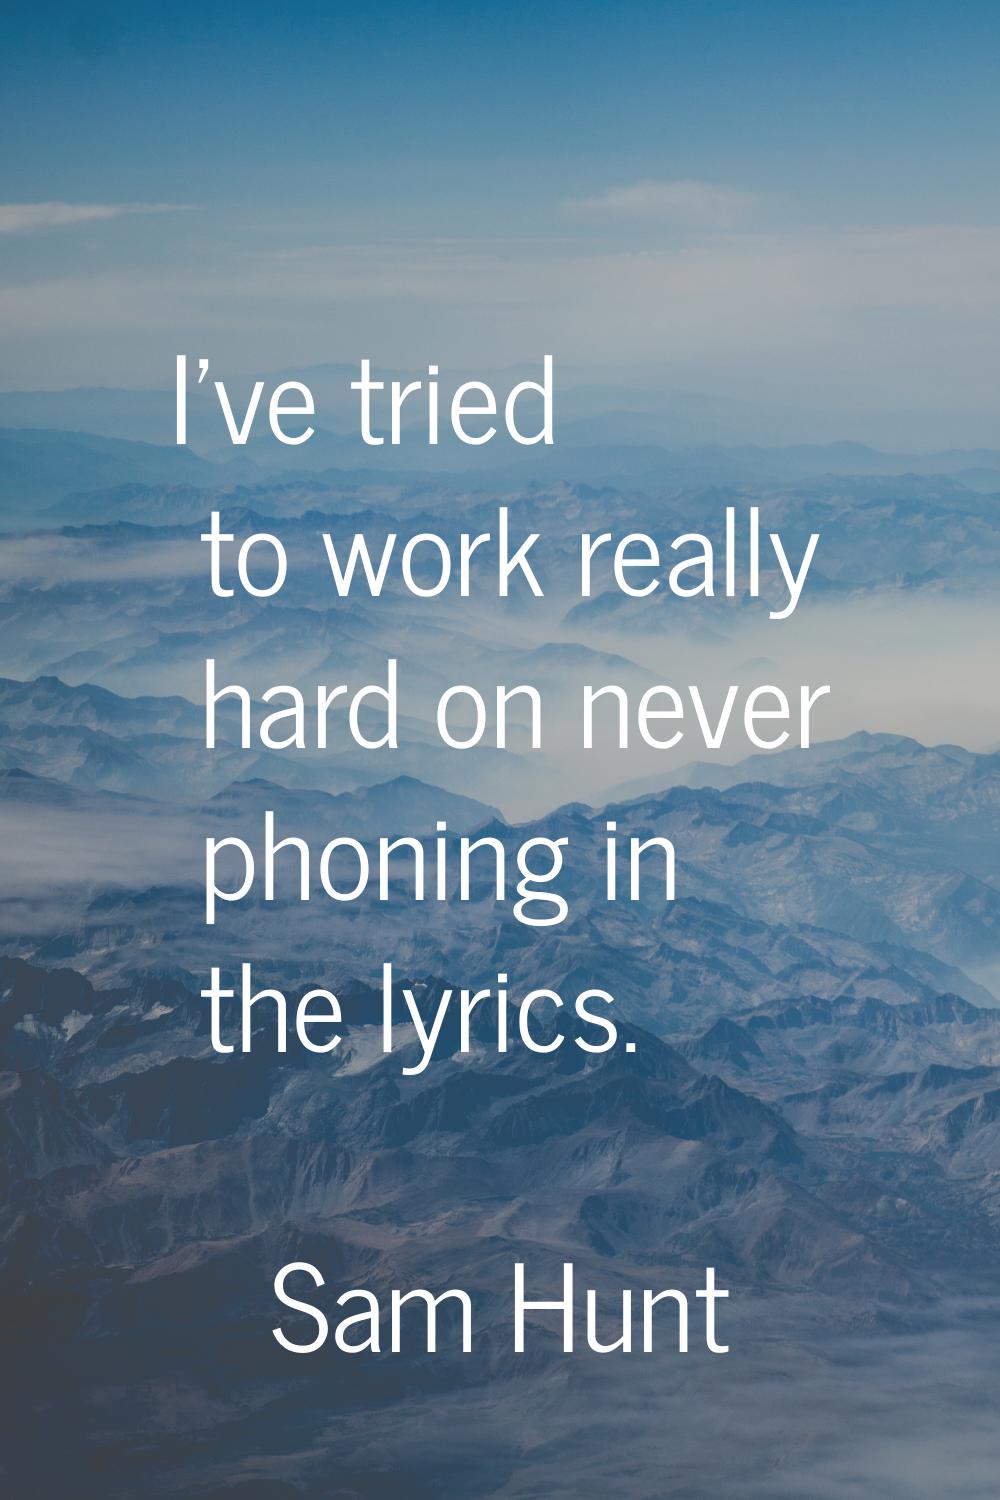 I've tried to work really hard on never phoning in the lyrics.